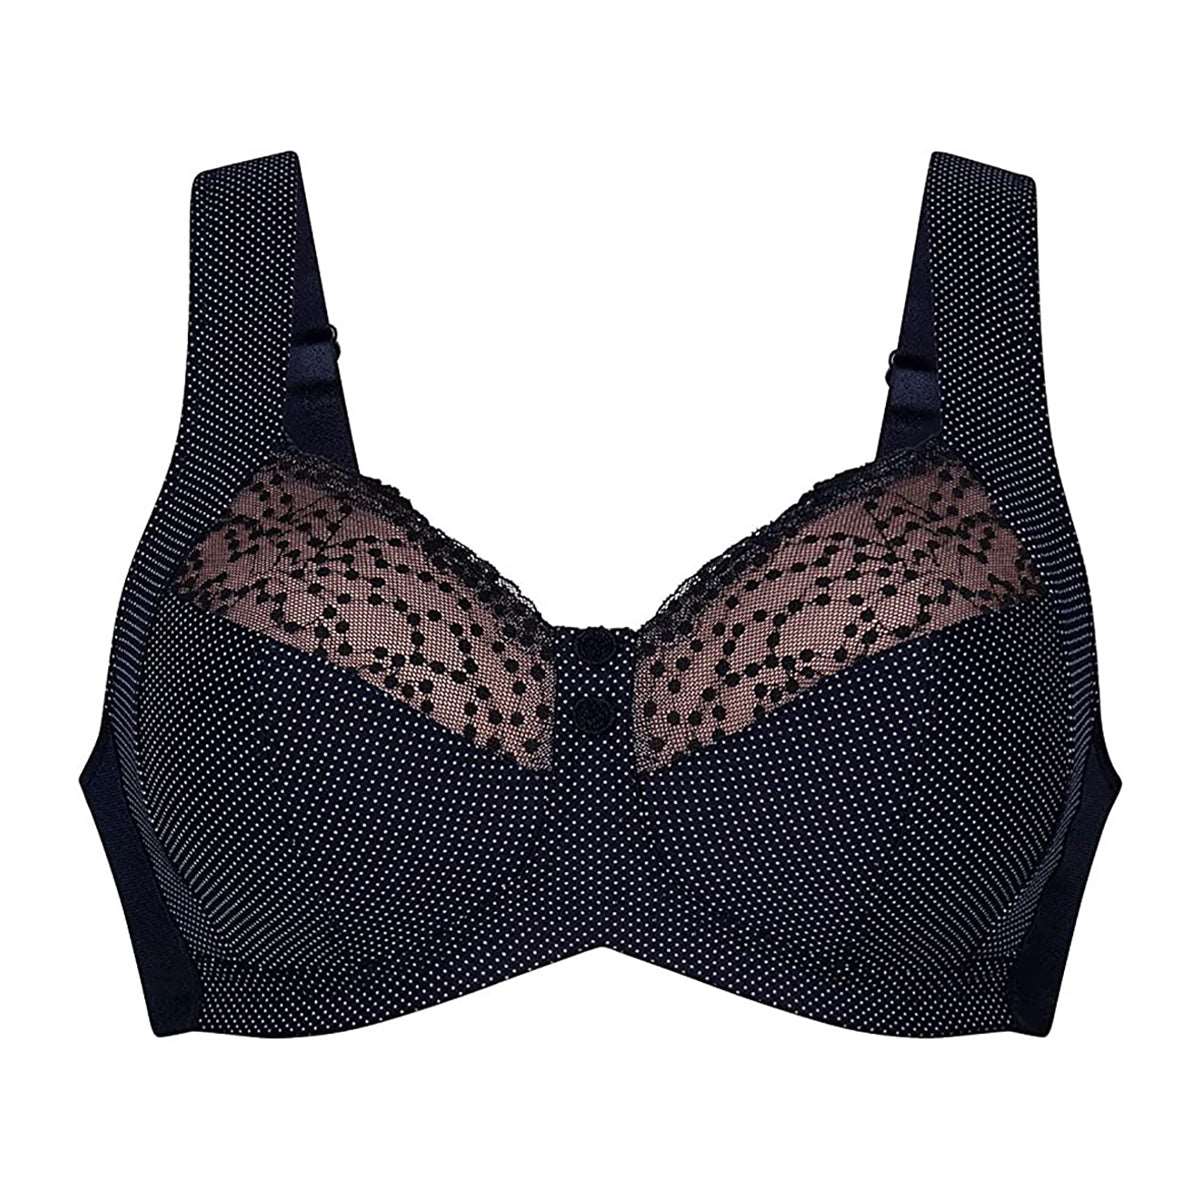 Anita Madlene Front Closure Mastectomy Bra in Black FINAL SALE NORMALLY $45  - Busted Bra Shop